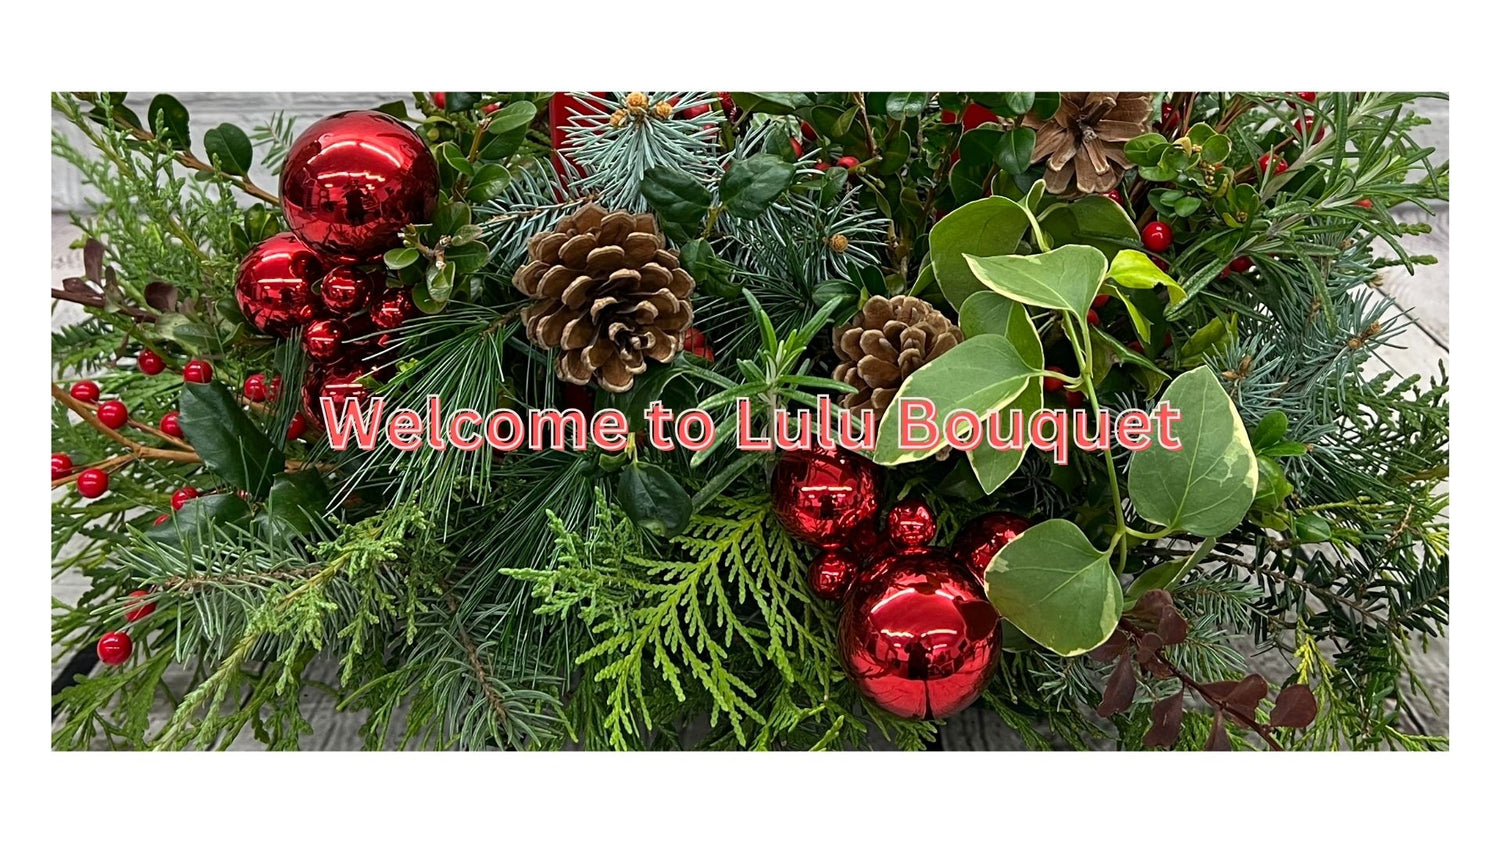 WELCOME TO LULU'S! - About